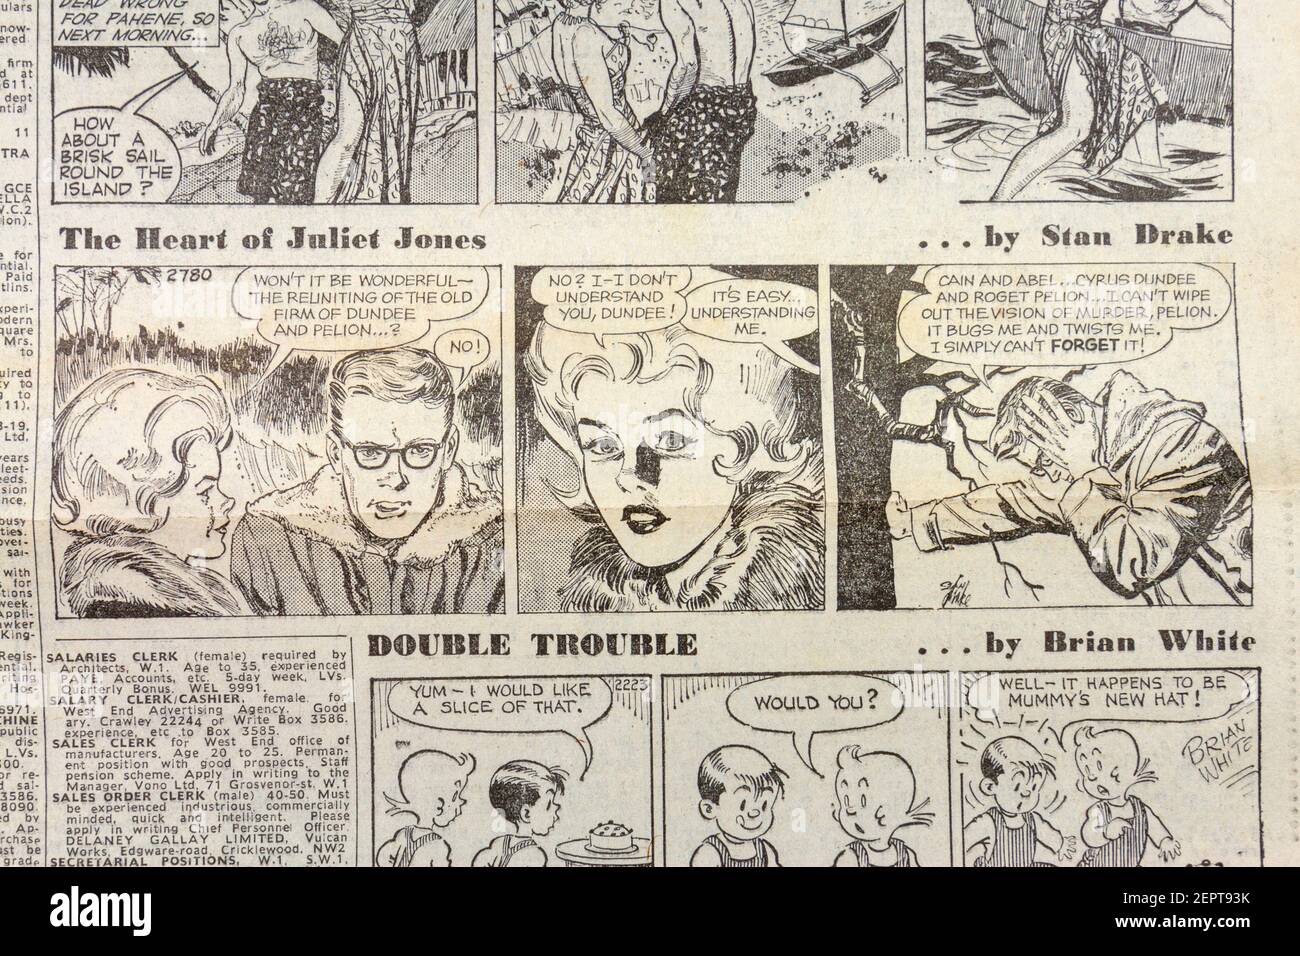 The Heart of Juliet Jones comic strip for in the Evening News newspaper (Thursday 10th May 1962), London, UK. Stock Photo